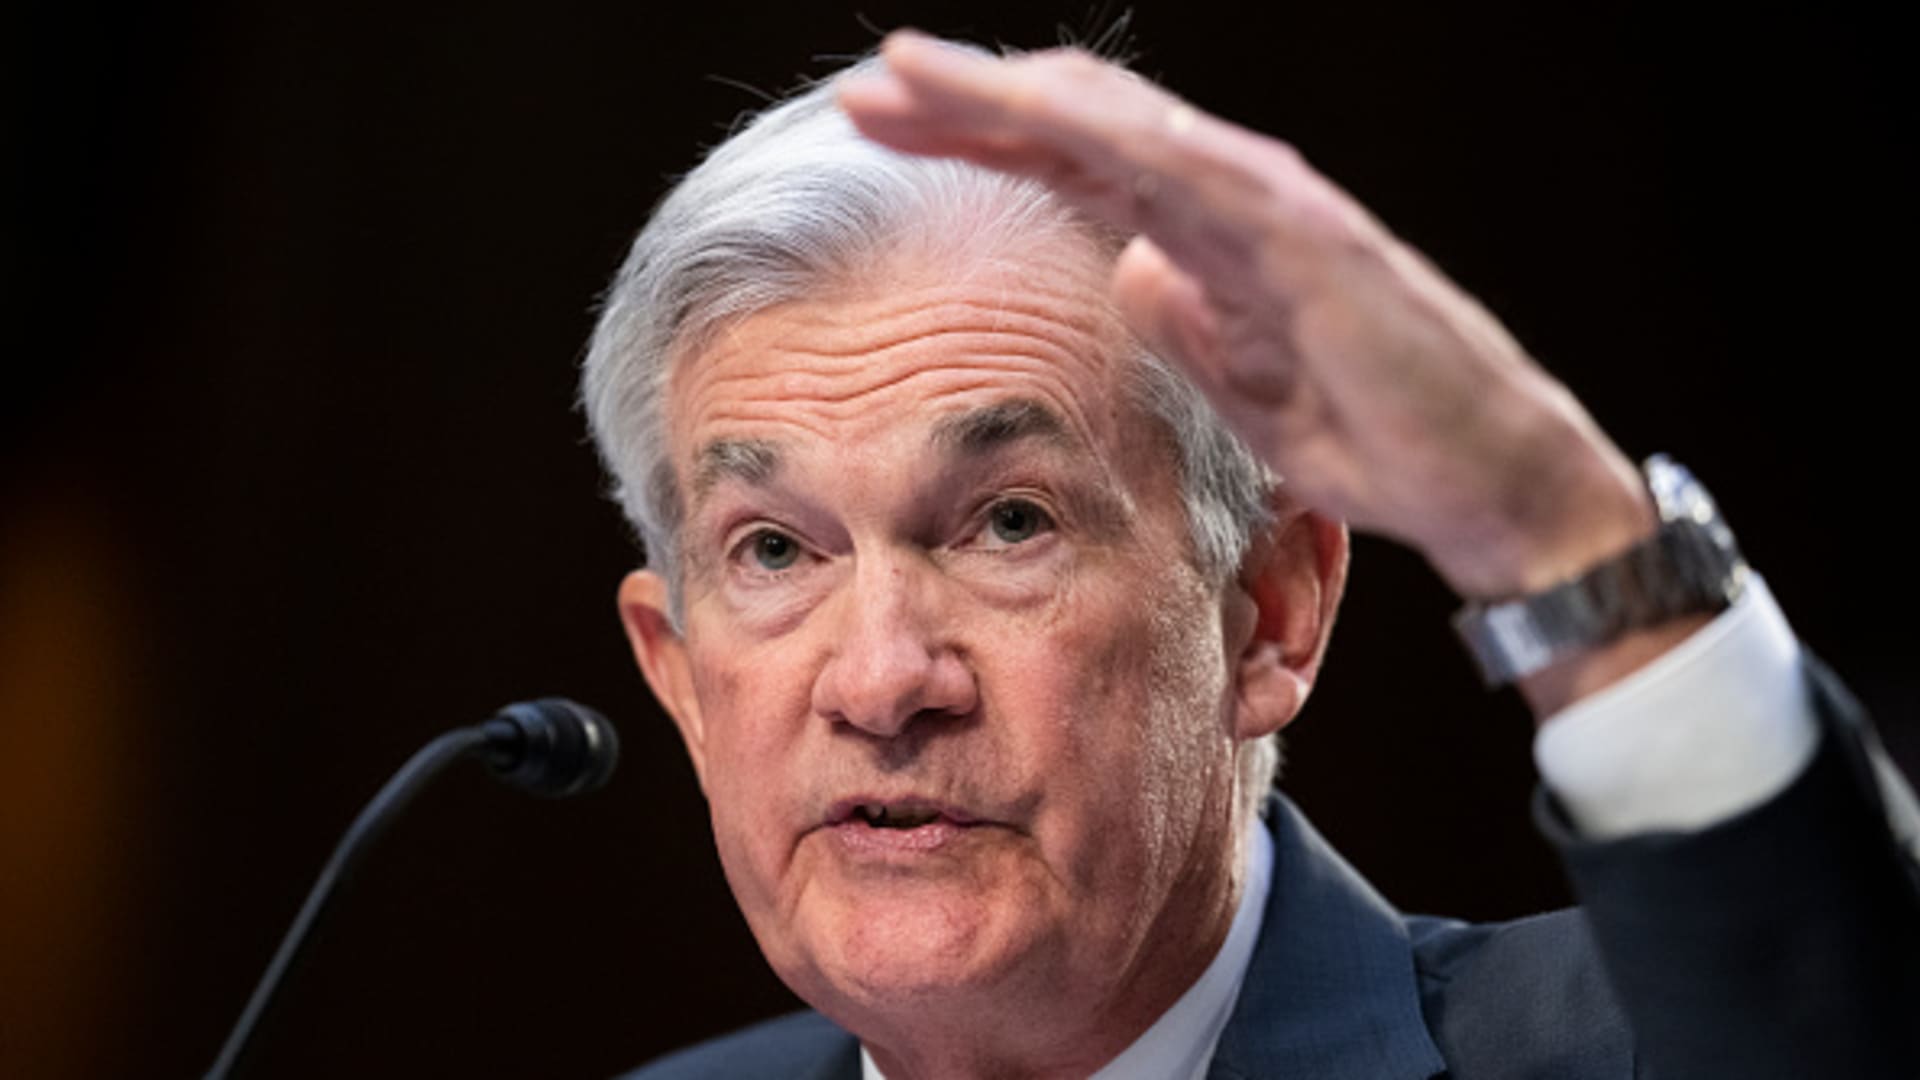 Something broke, but the Fed is still expected to go through with rate hikes